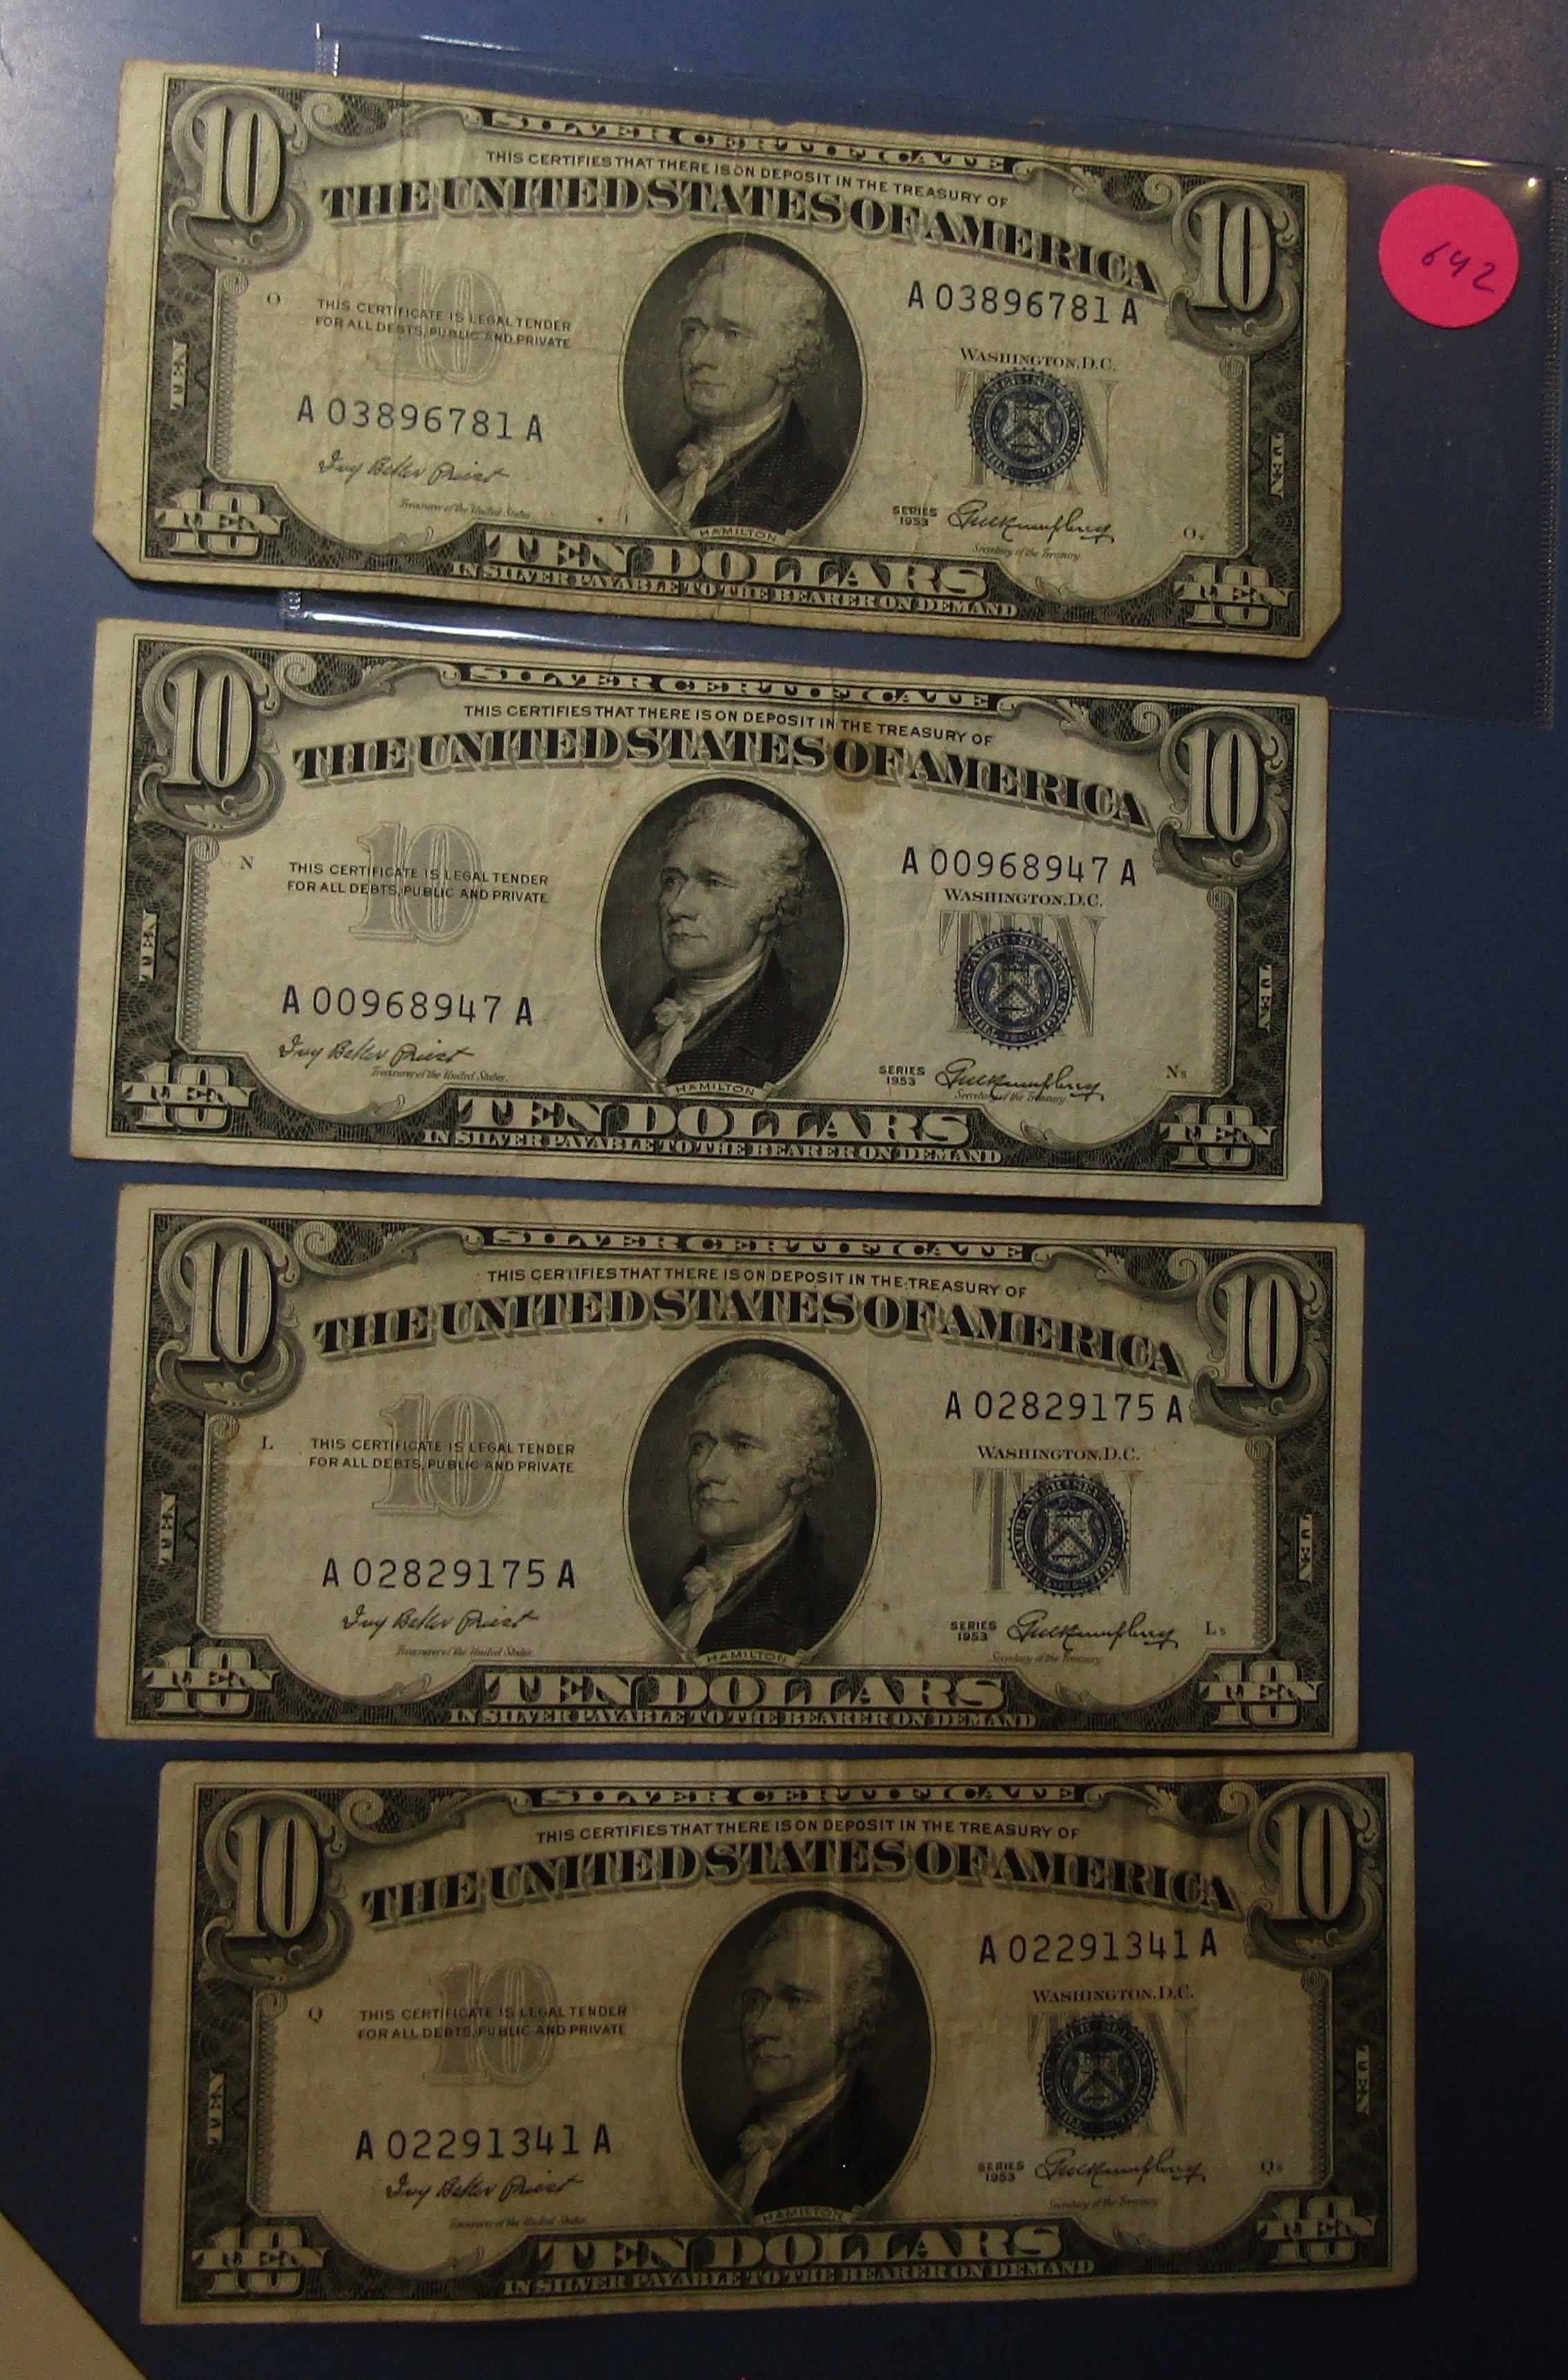 LOT OF EIGHT 1953 $10.00 SILVER CERTIFICATE NOTES AVE. CIRC. (8 NOTES)